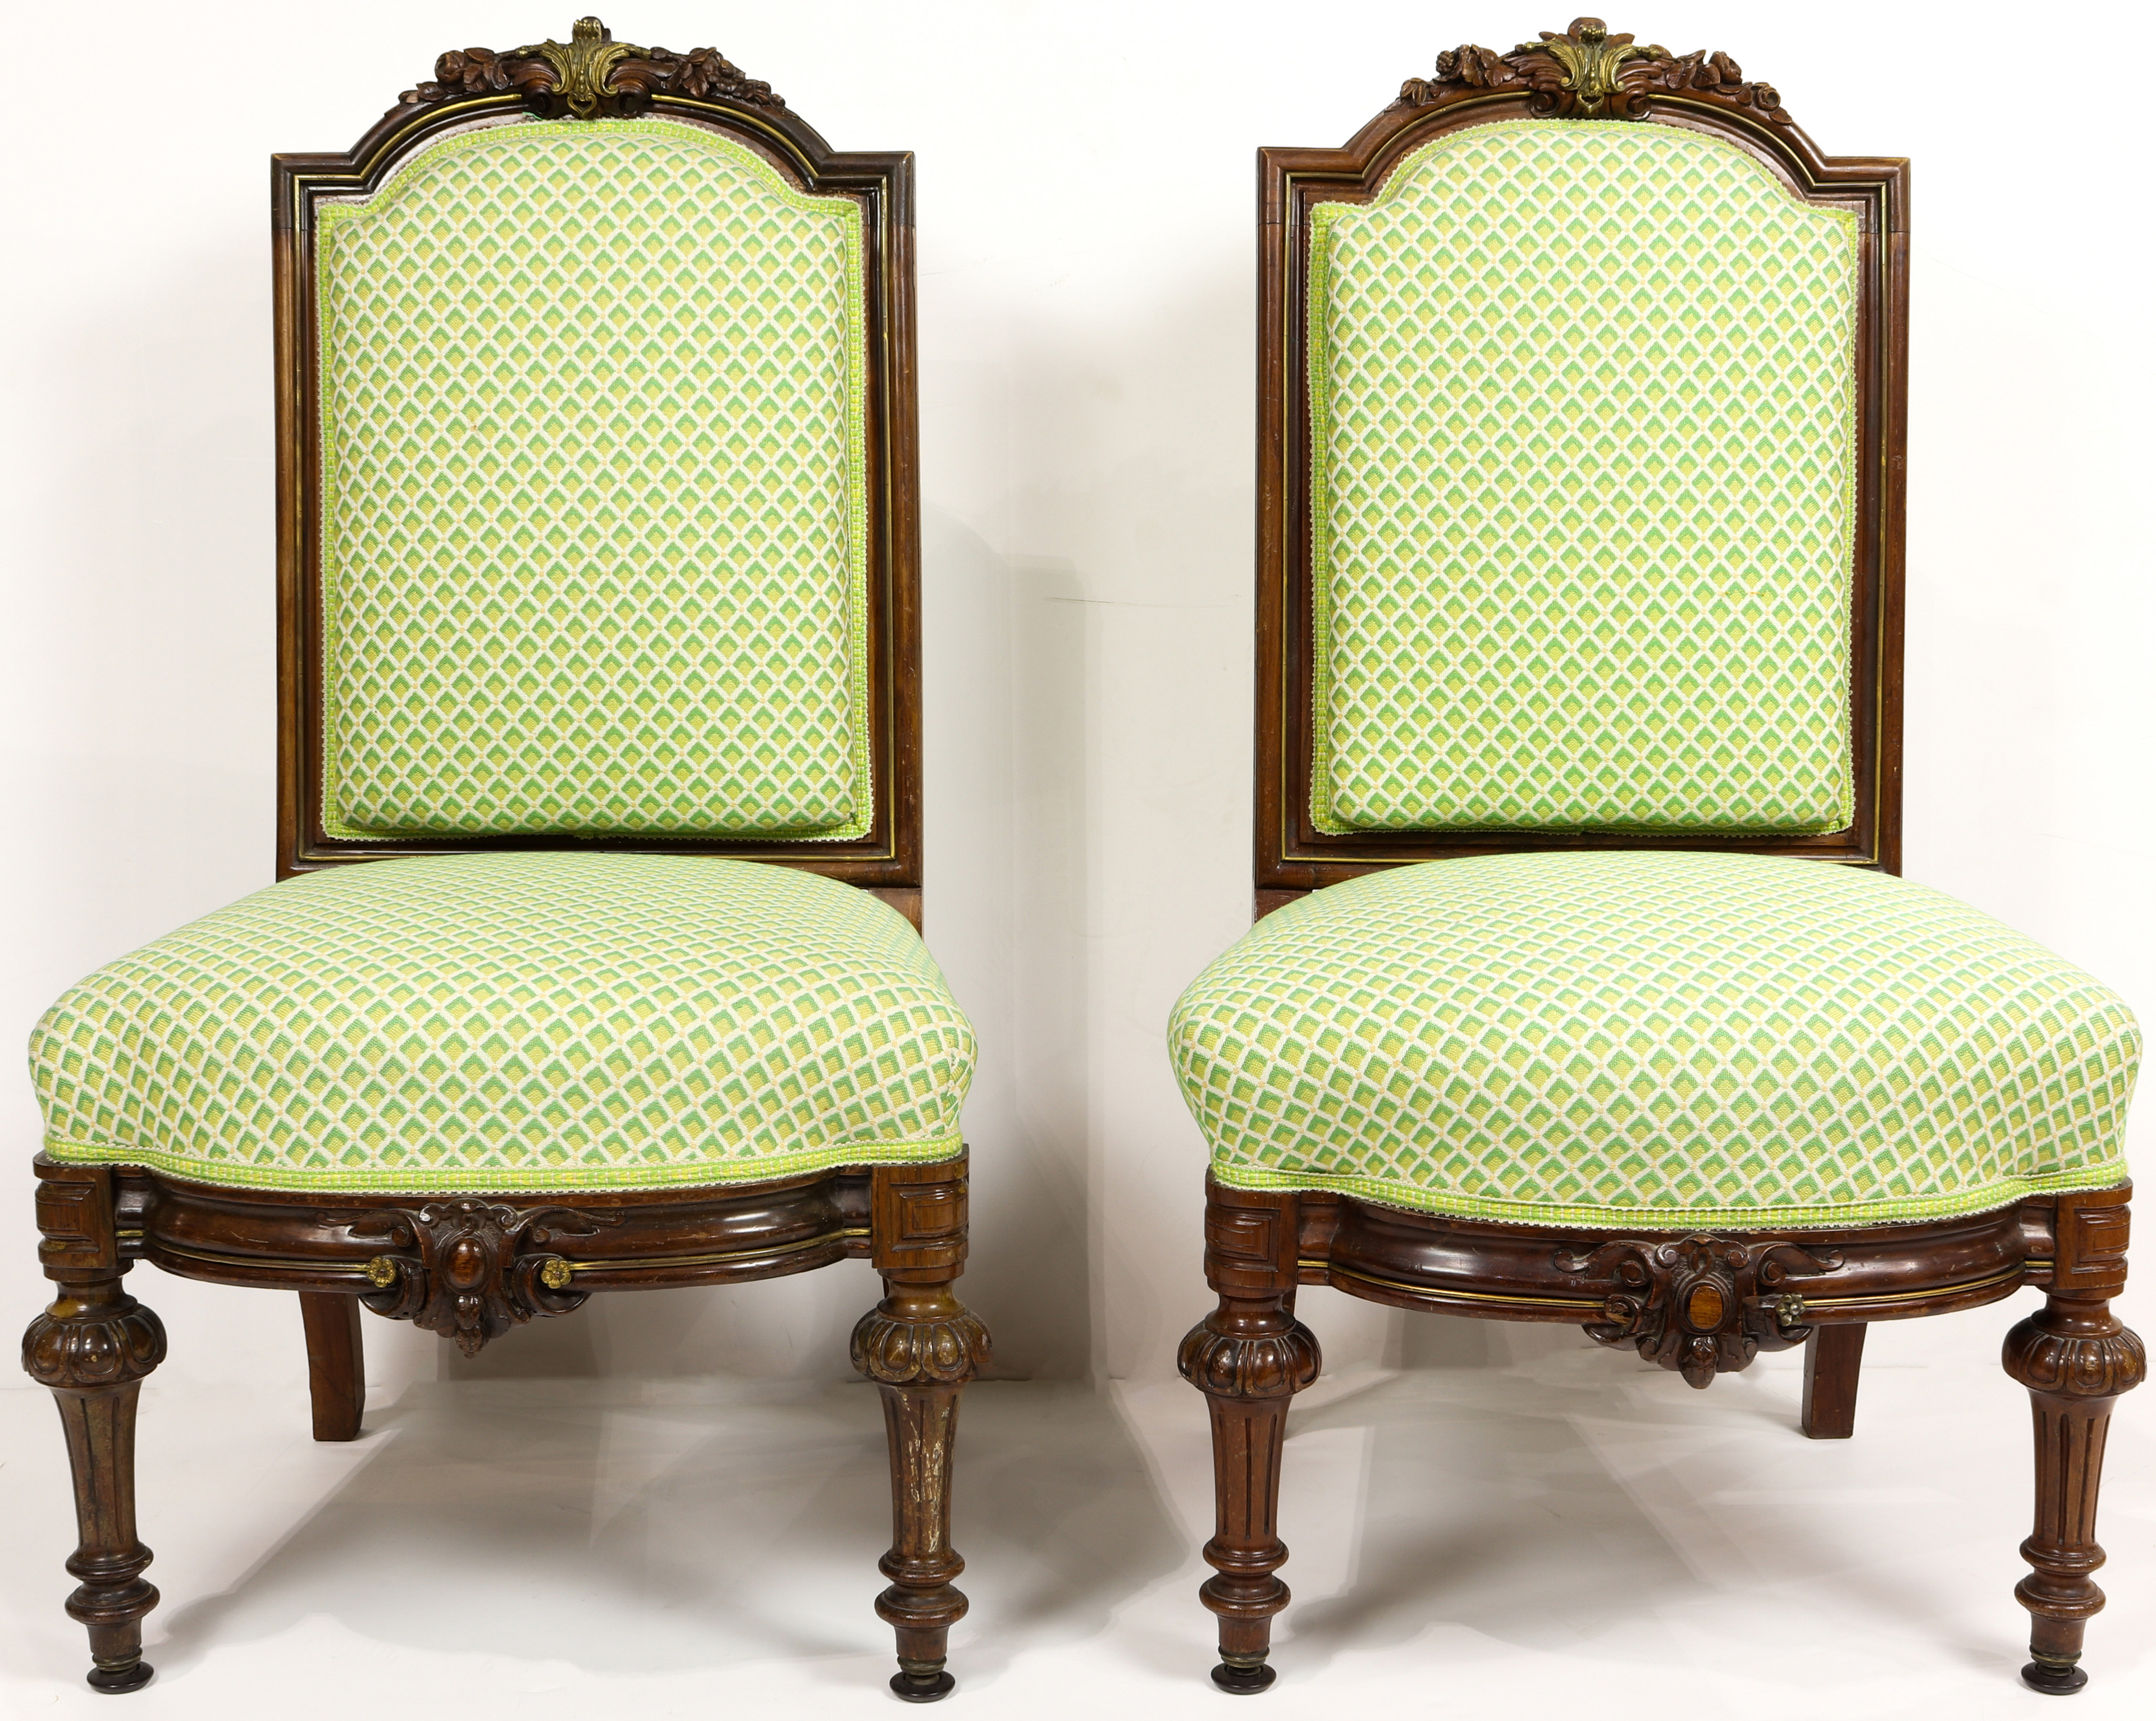 A PAIR OF ROCOCO REVIVAL STYLE